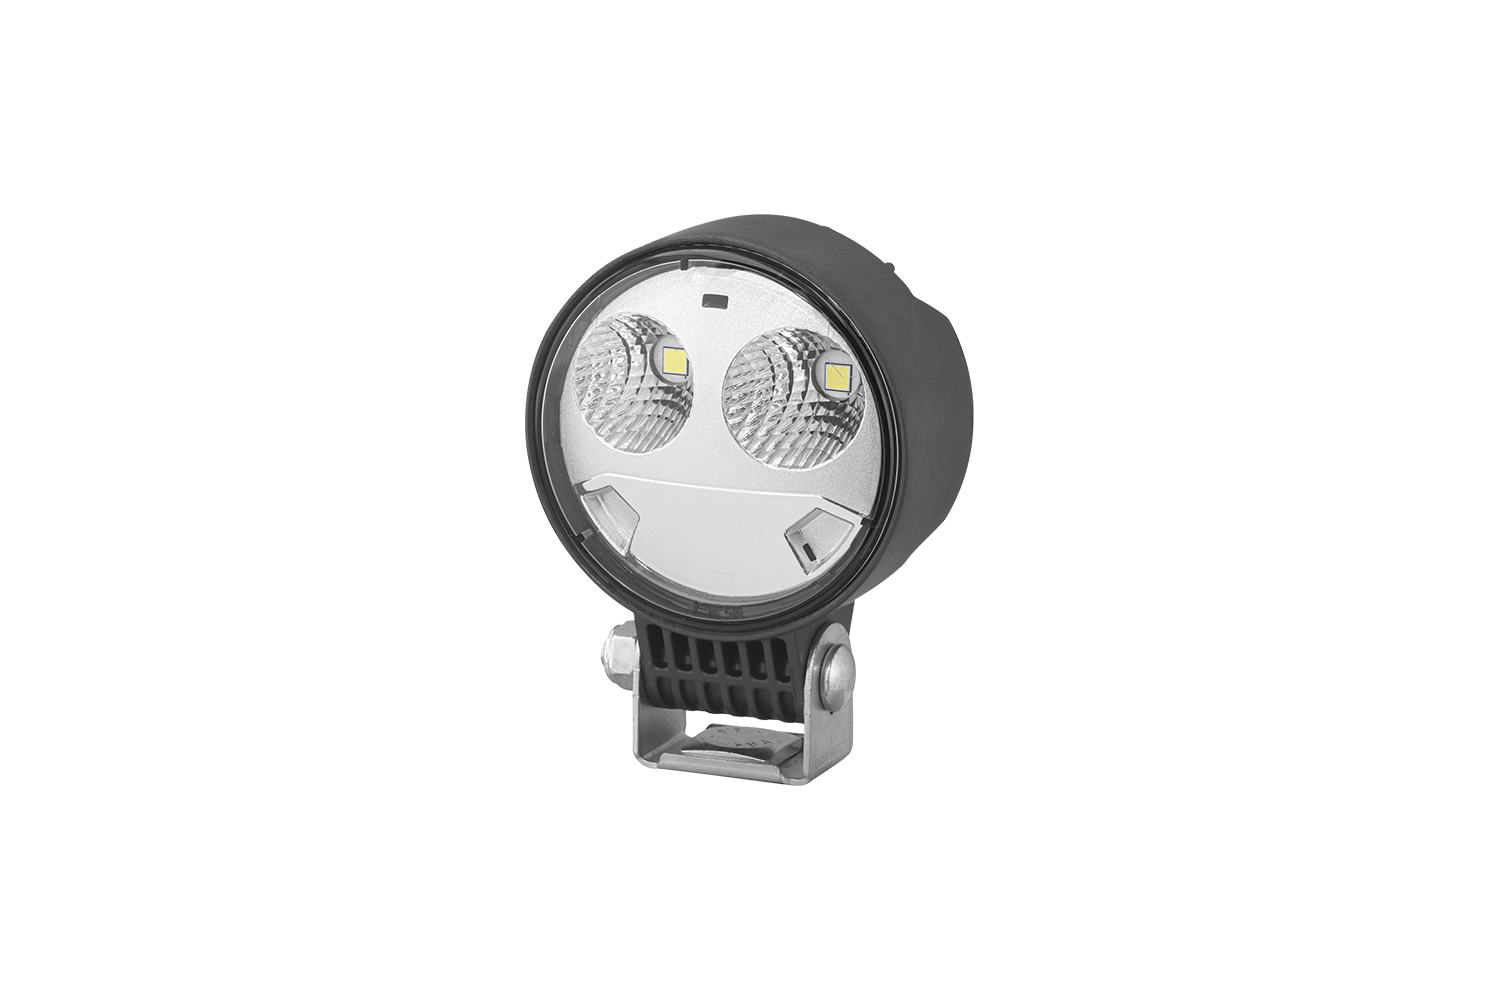 Module 70 S-series work lamps from Hella offered by Patlon